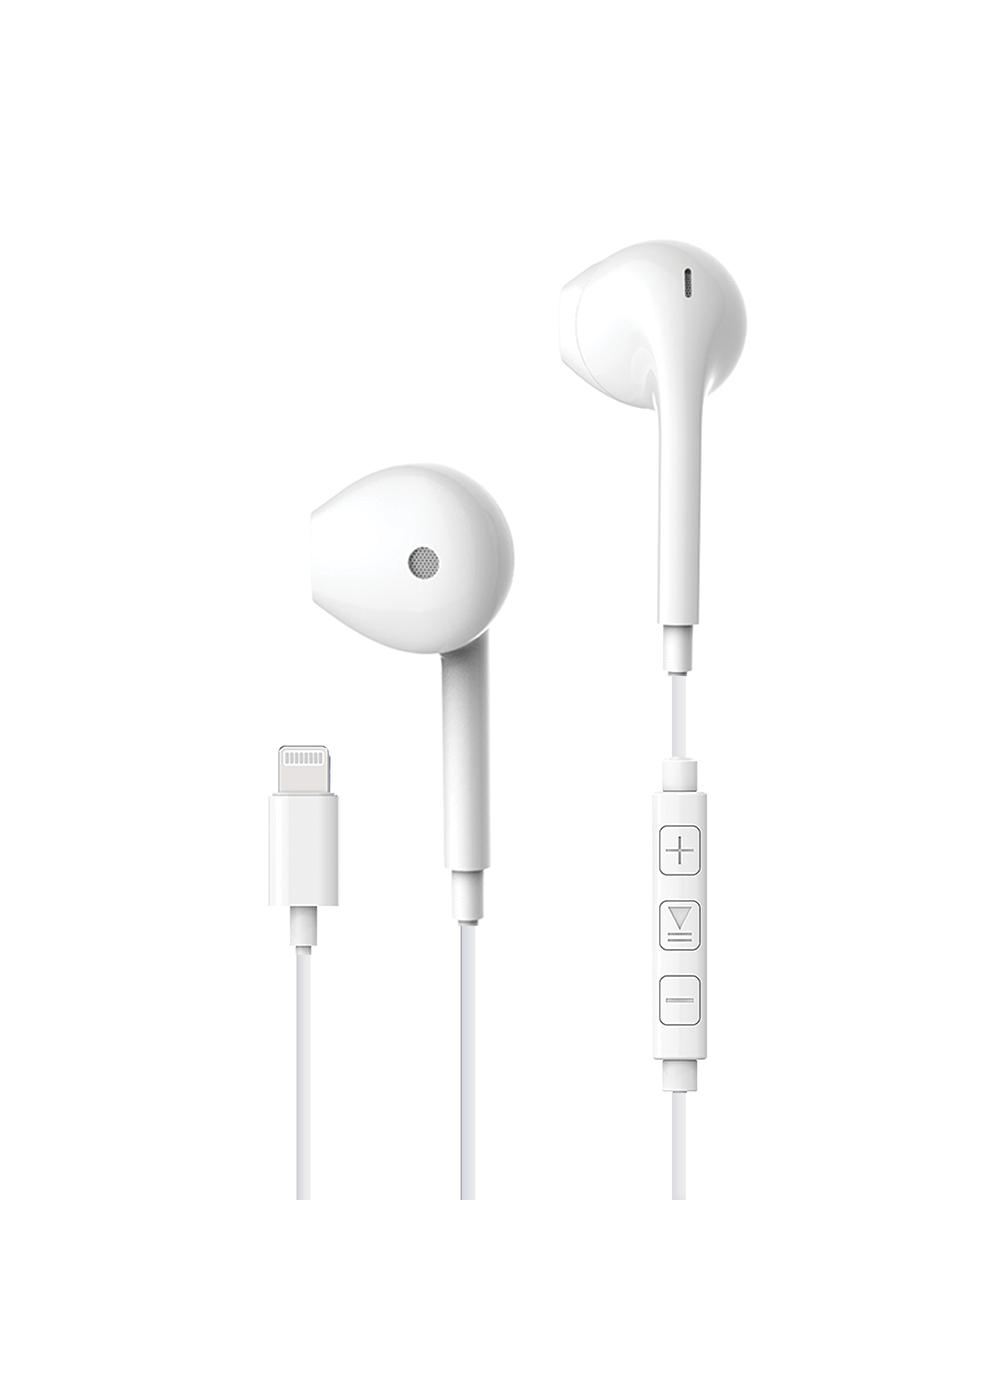 Biconic Lightning Stereo Earbuds - White; image 2 of 2